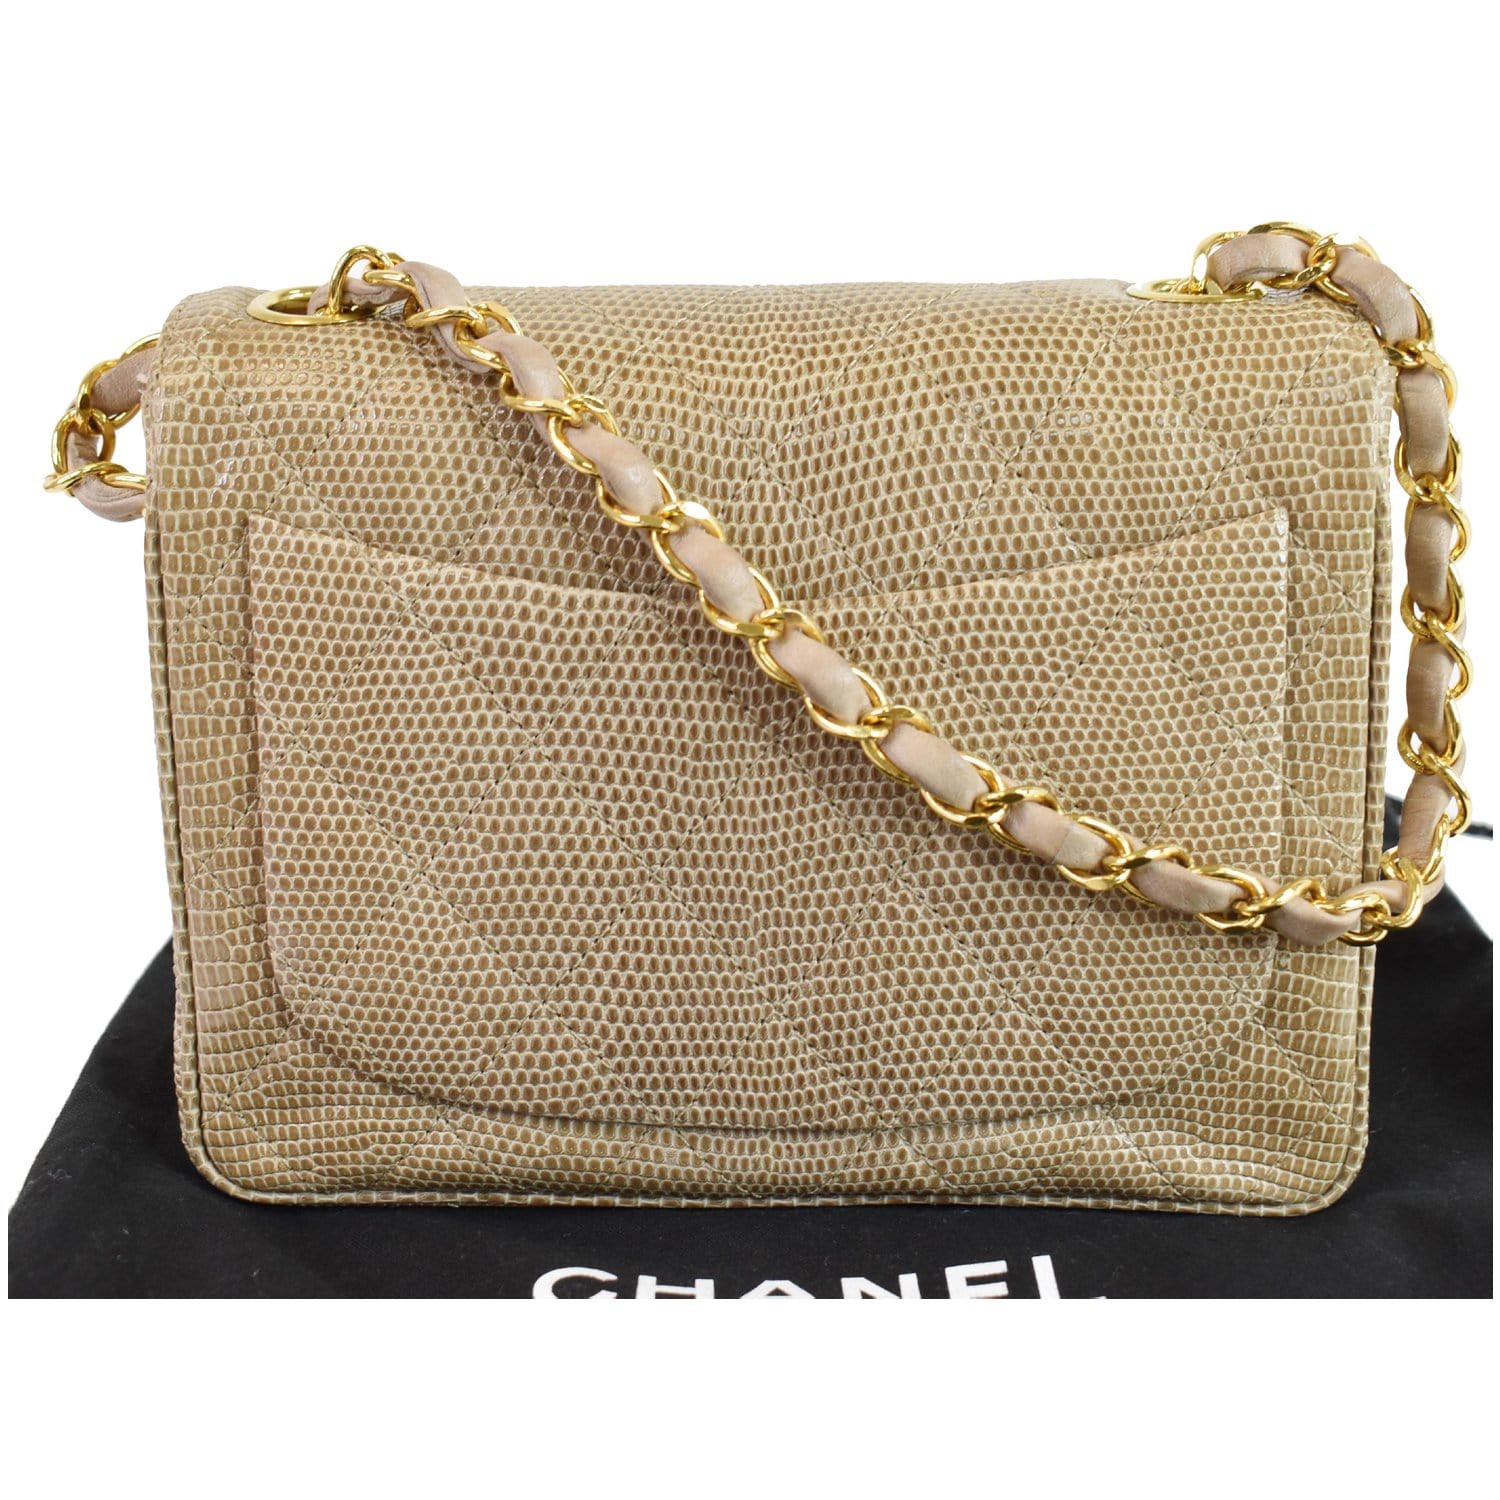 Sold at Auction: Chanel Quilted Tan Leather Bag